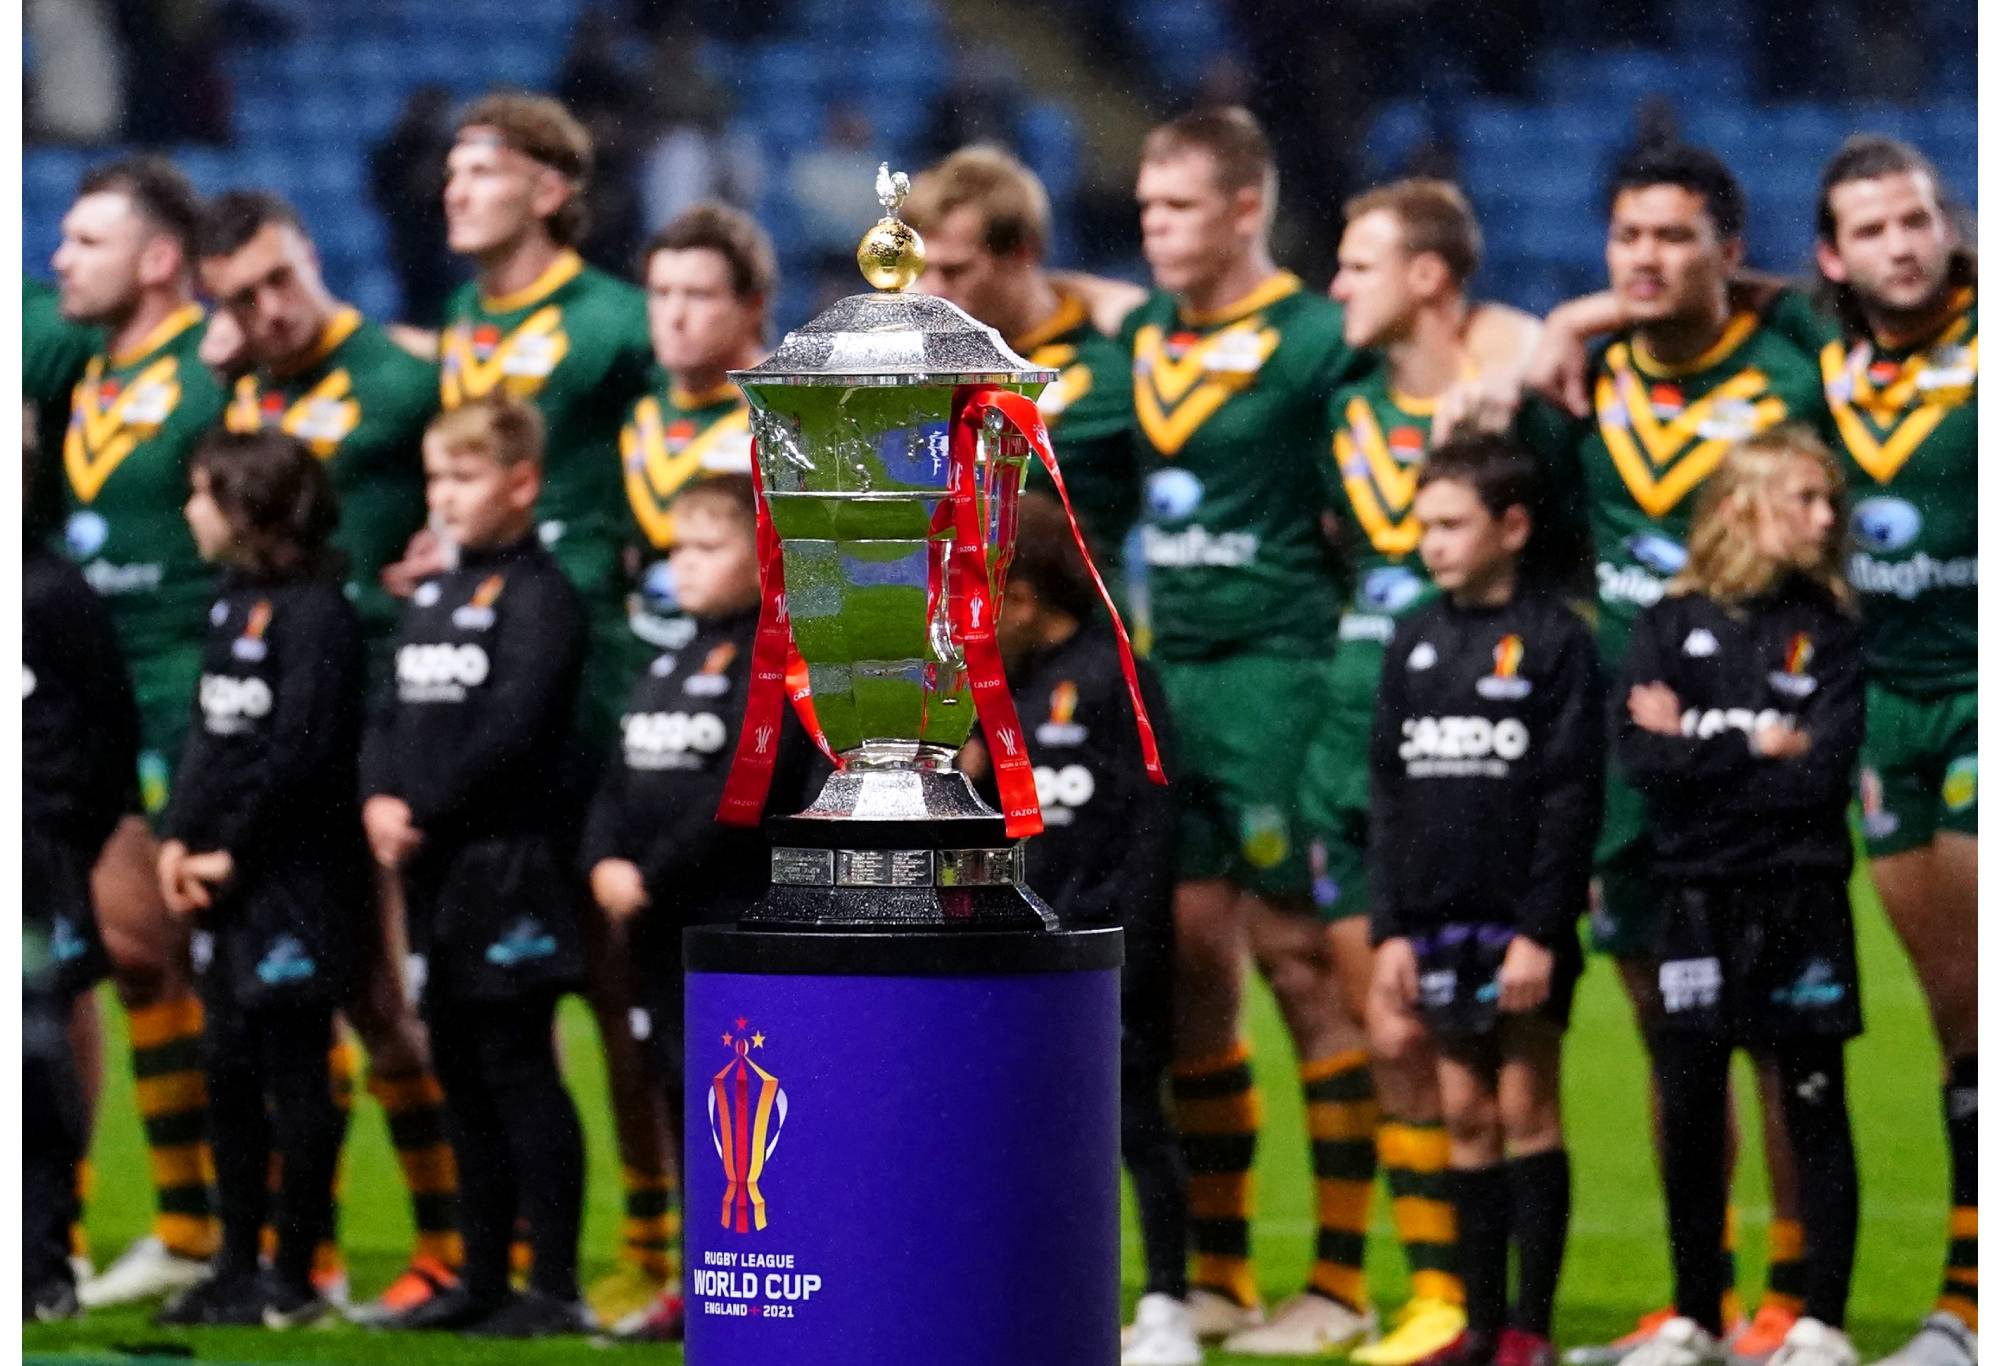 A general view of the trophy on display ahead of the Rugby League World Cup group B match at the Coventry Building Society Arena, Coventry. Picture date: Friday October 21, 2022. (Photo by David Davies/PA Images via Getty Images)